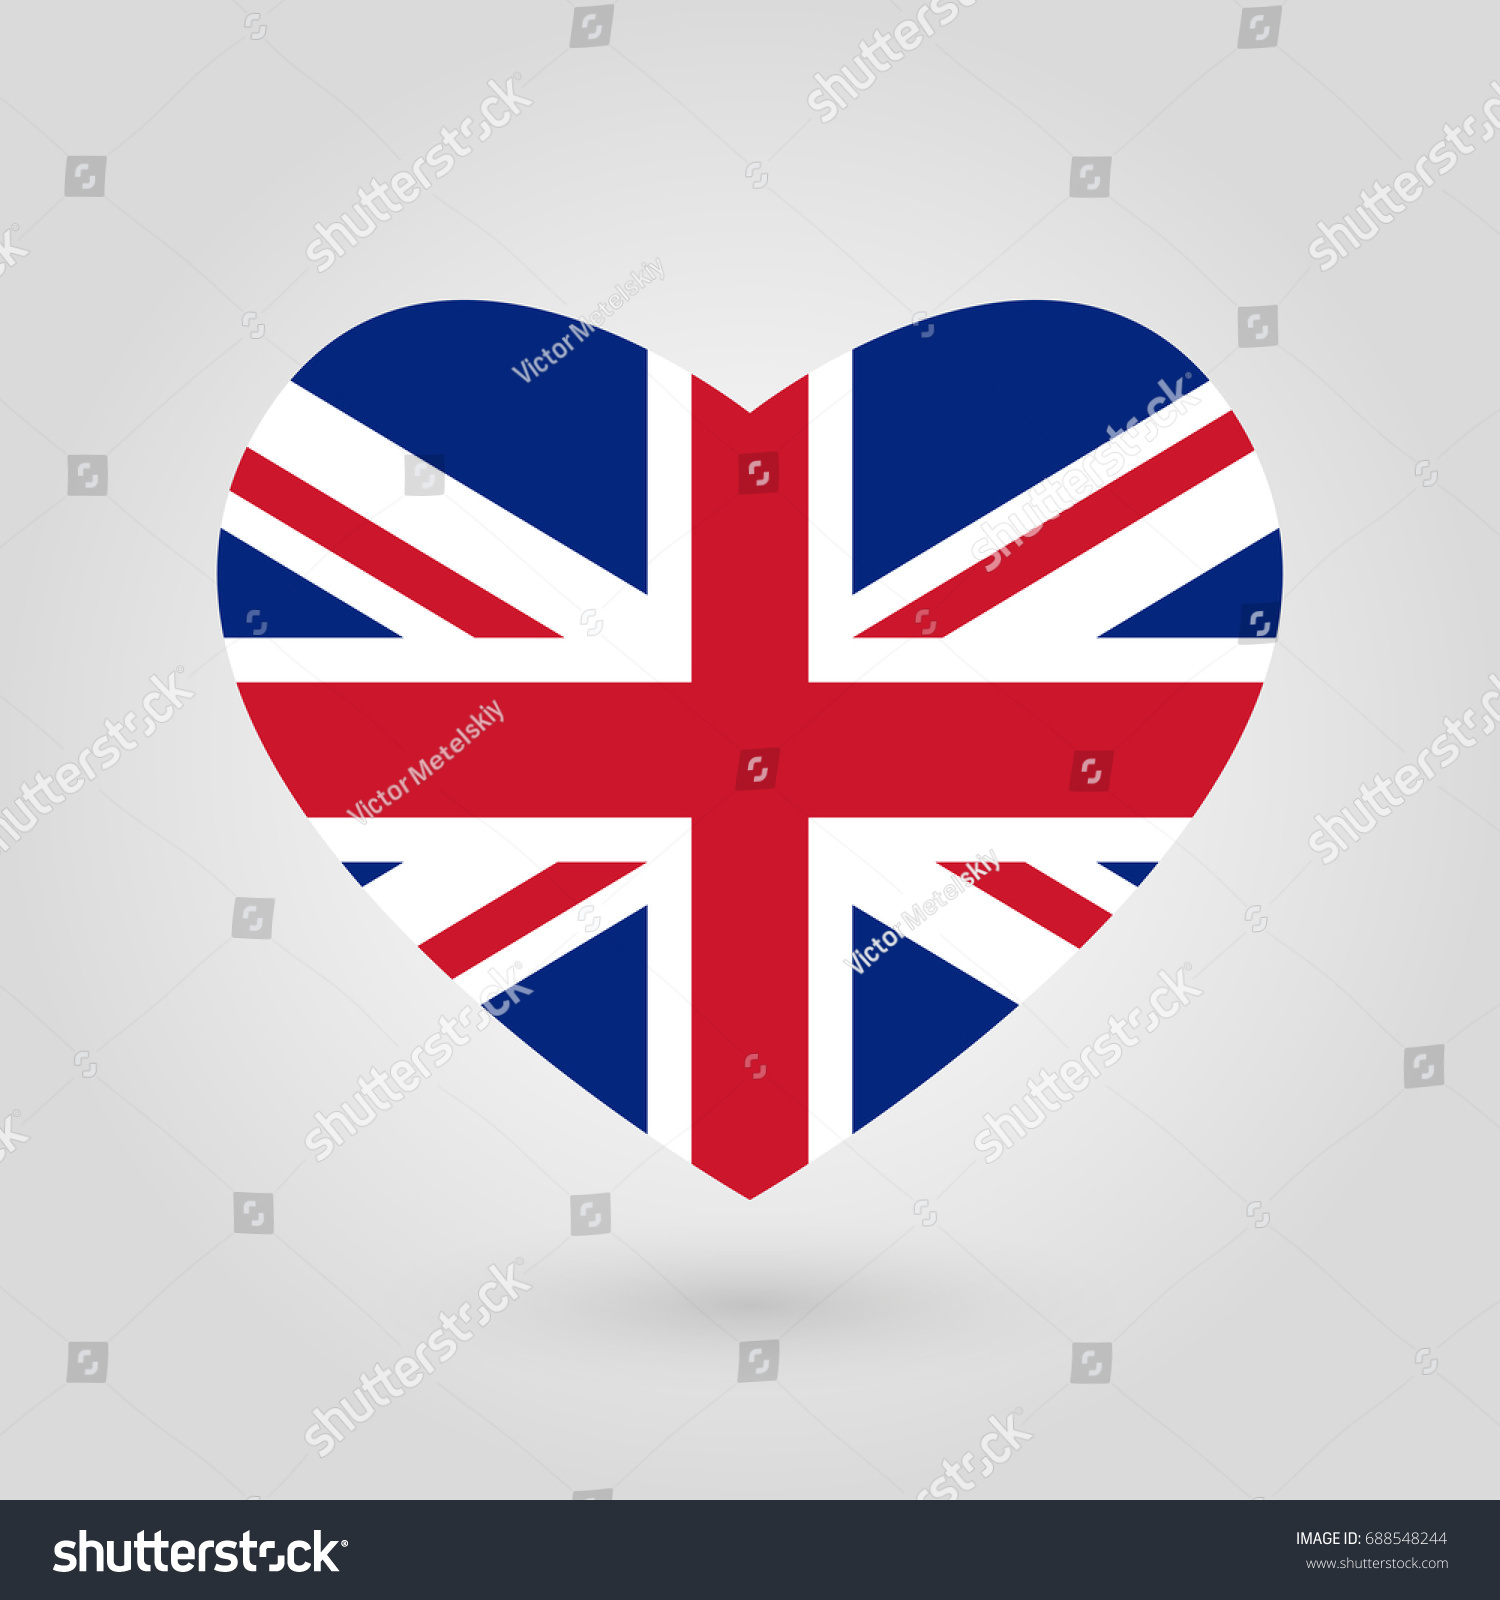 SVG of UK flag in the heart shape. British flag icon. Great Britain, United Kingdom and England national symbol. Vector illustration. svg